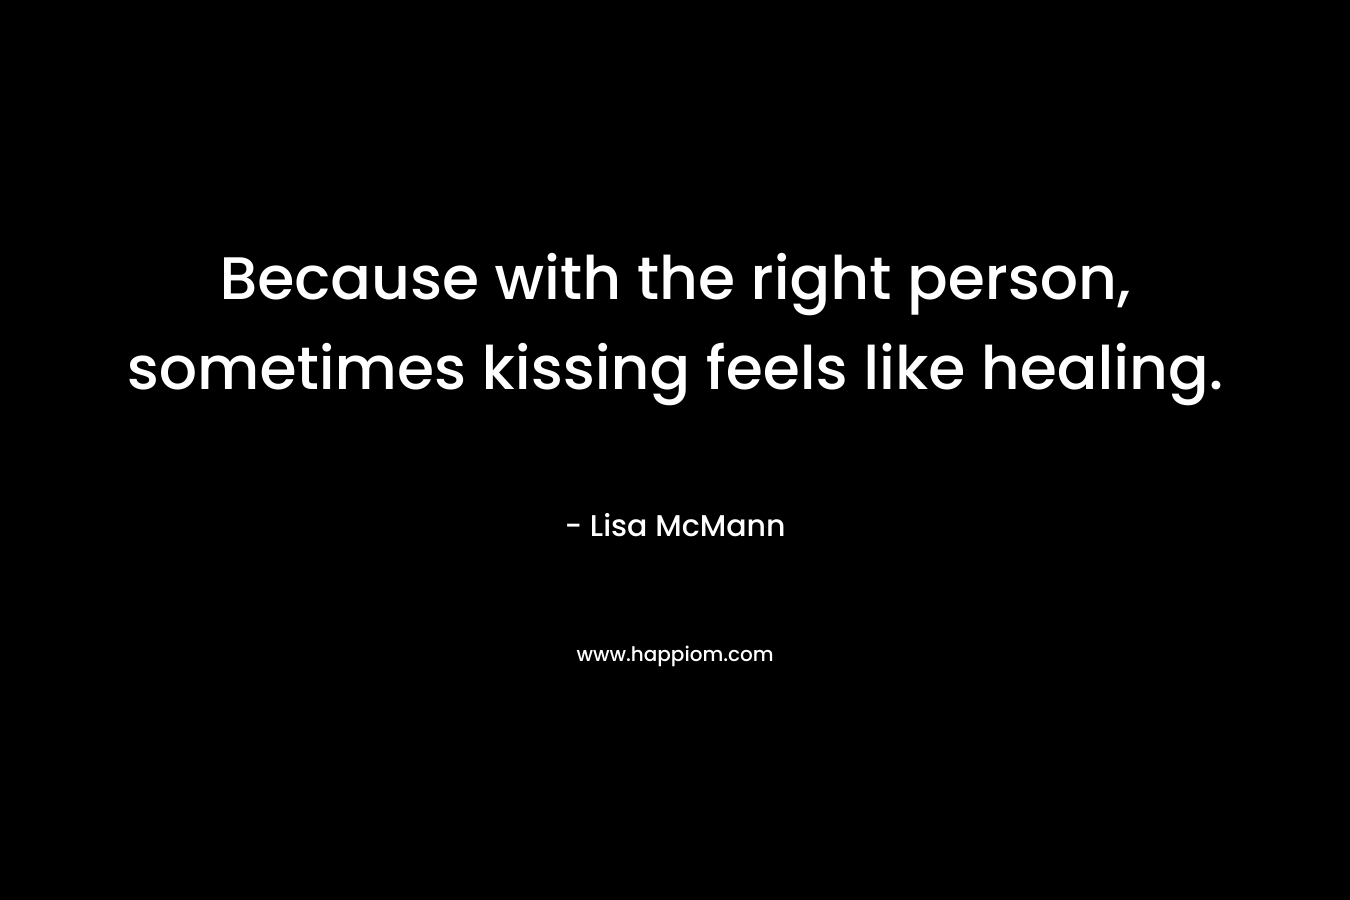 Because with the right person, sometimes kissing feels like healing. – Lisa McMann